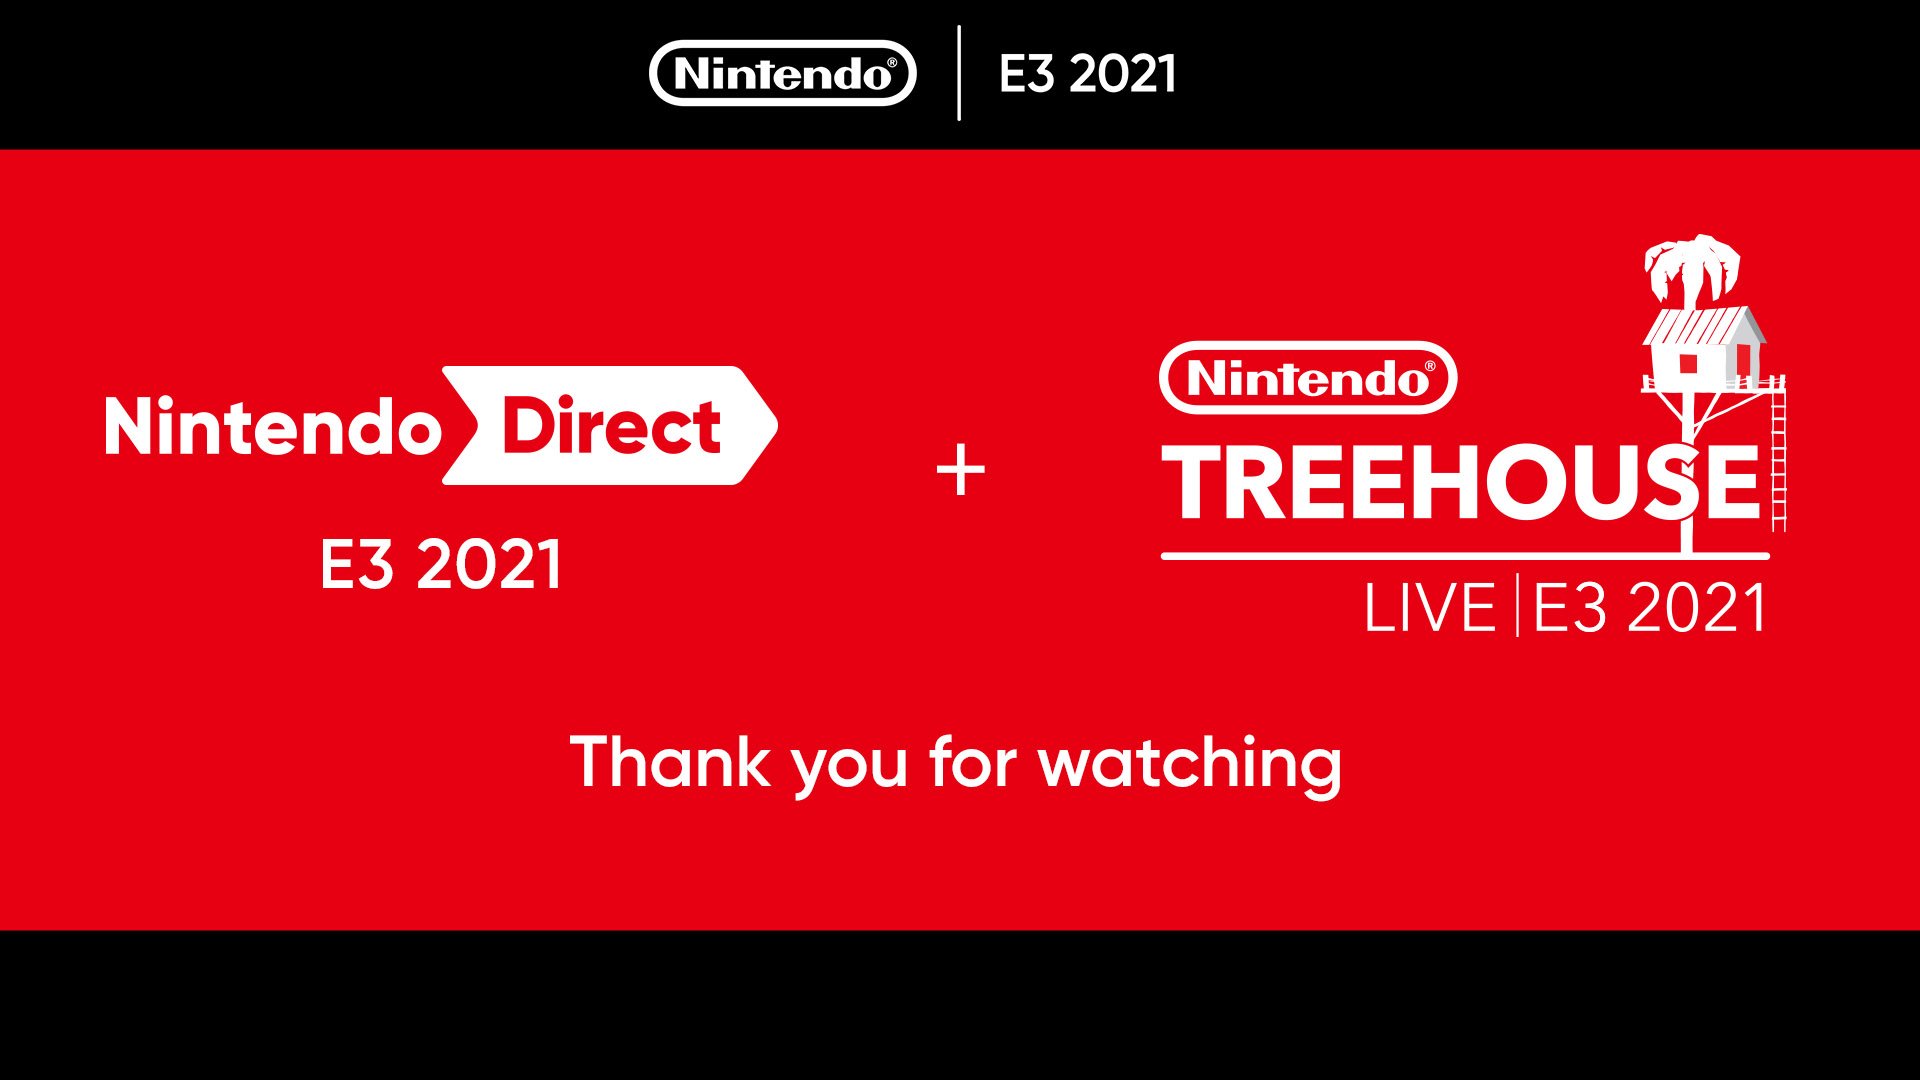 I detaljer Vag meget fint Nintendo of America on Twitter: "That's a wrap on Nintendo at #E32021!  Thanks to all who tuned in to #NintendoDirect and #NintendoTreehouseLive.  Today, we showed a sampling of what's coming to #NintendoSwitch.